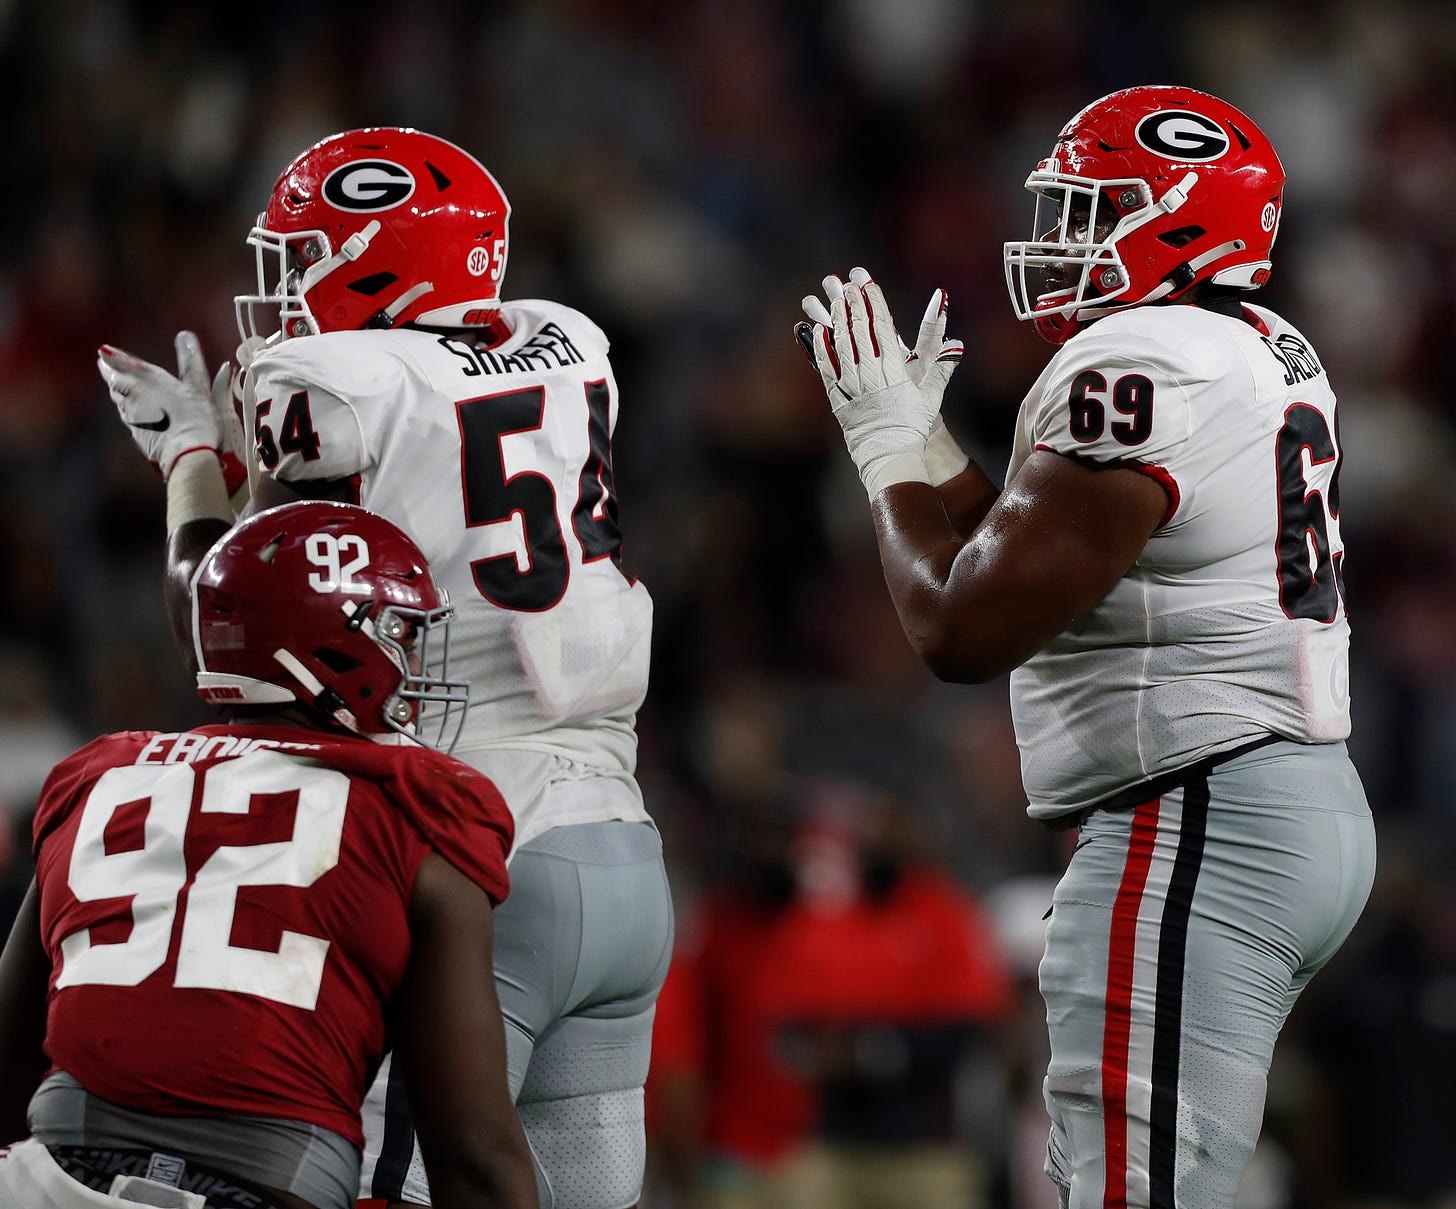 Georgia offensive lineman Jamaree Salyer (69) and Georgia offensive lineman Justin Shaffer (54) during the Bulldogs' game with Alabama in Tuscaloosa, Ala., on Saturday, Oct. 17, 2020. (Photo by Skylar Lien)